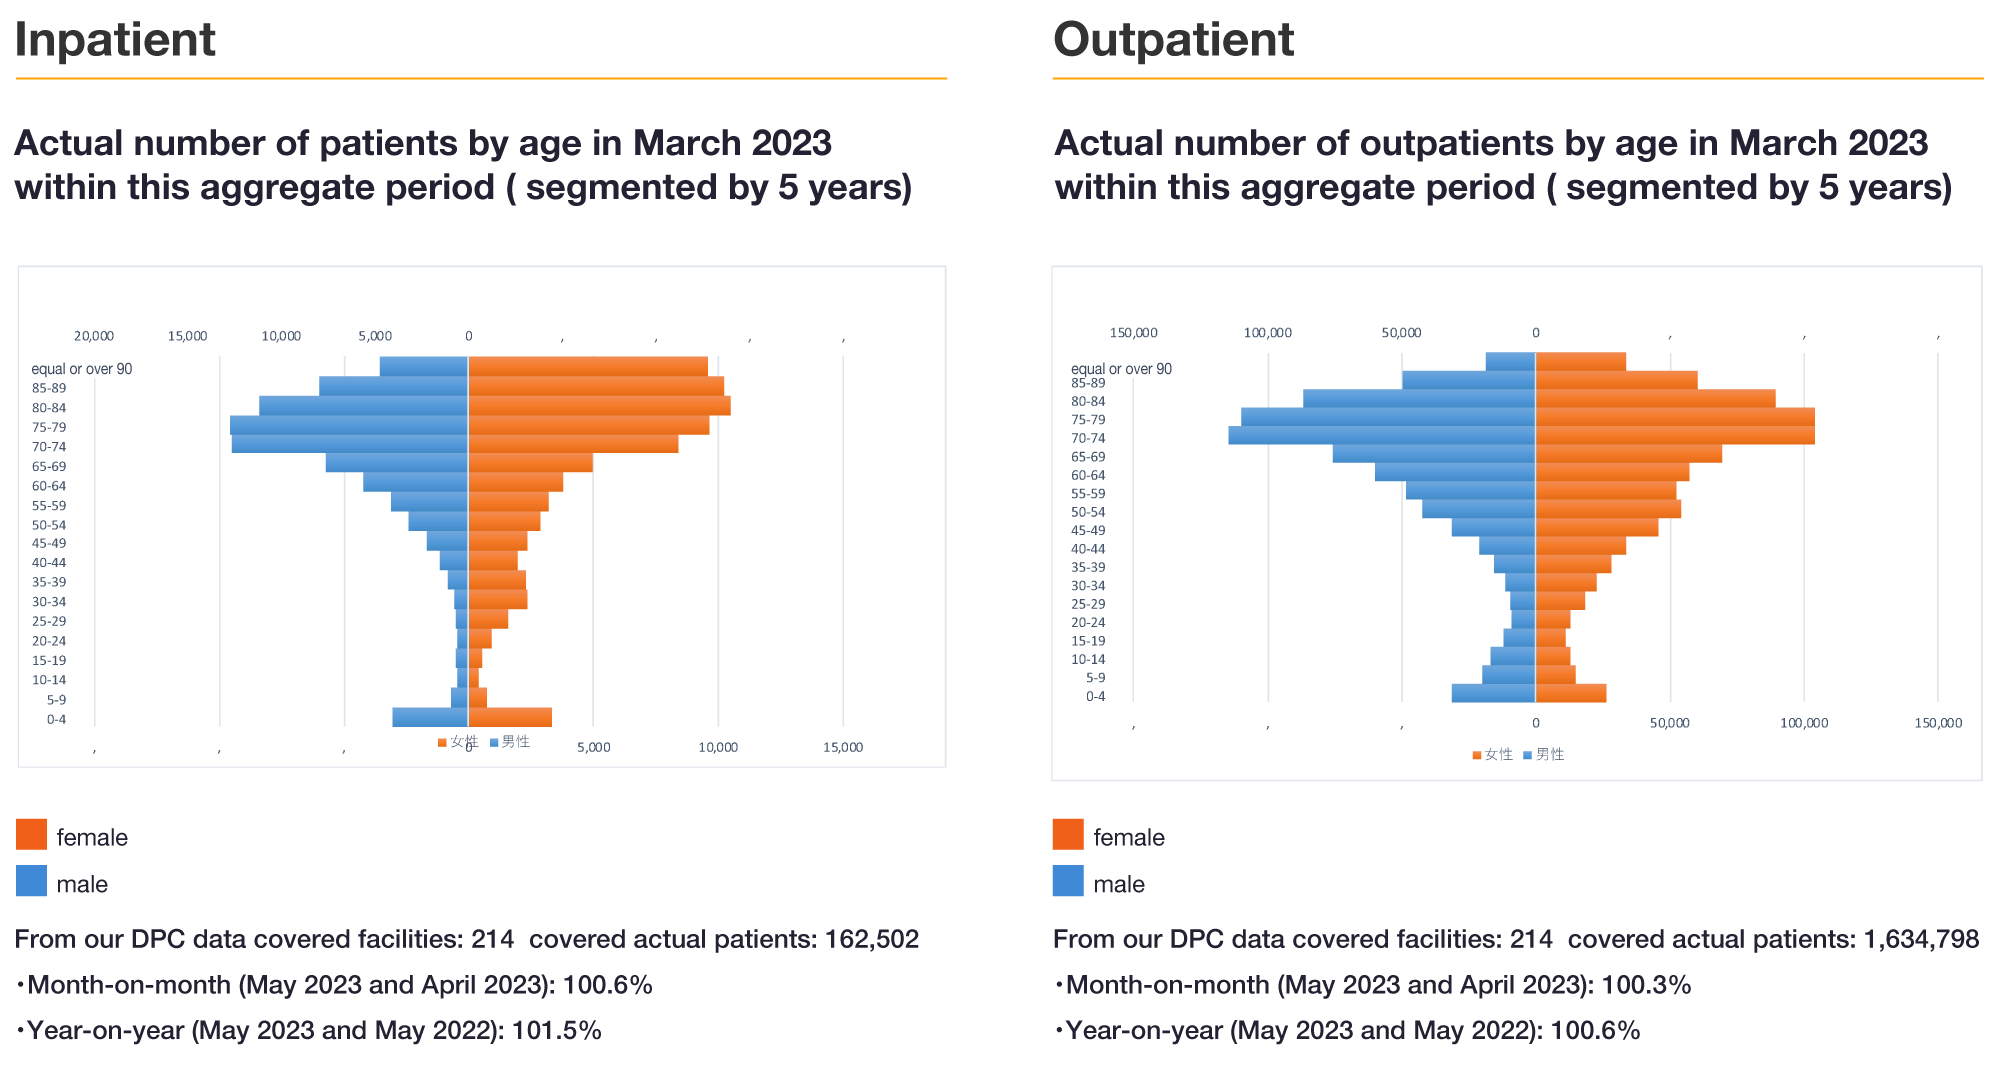 Inpatient Actual number of patients by age in March 2023 within this aggregate period(segmented by 5 years) Outpatient Actual number of outpatients by age in March 2023 within this aggregate period ( segmented by 5 years)